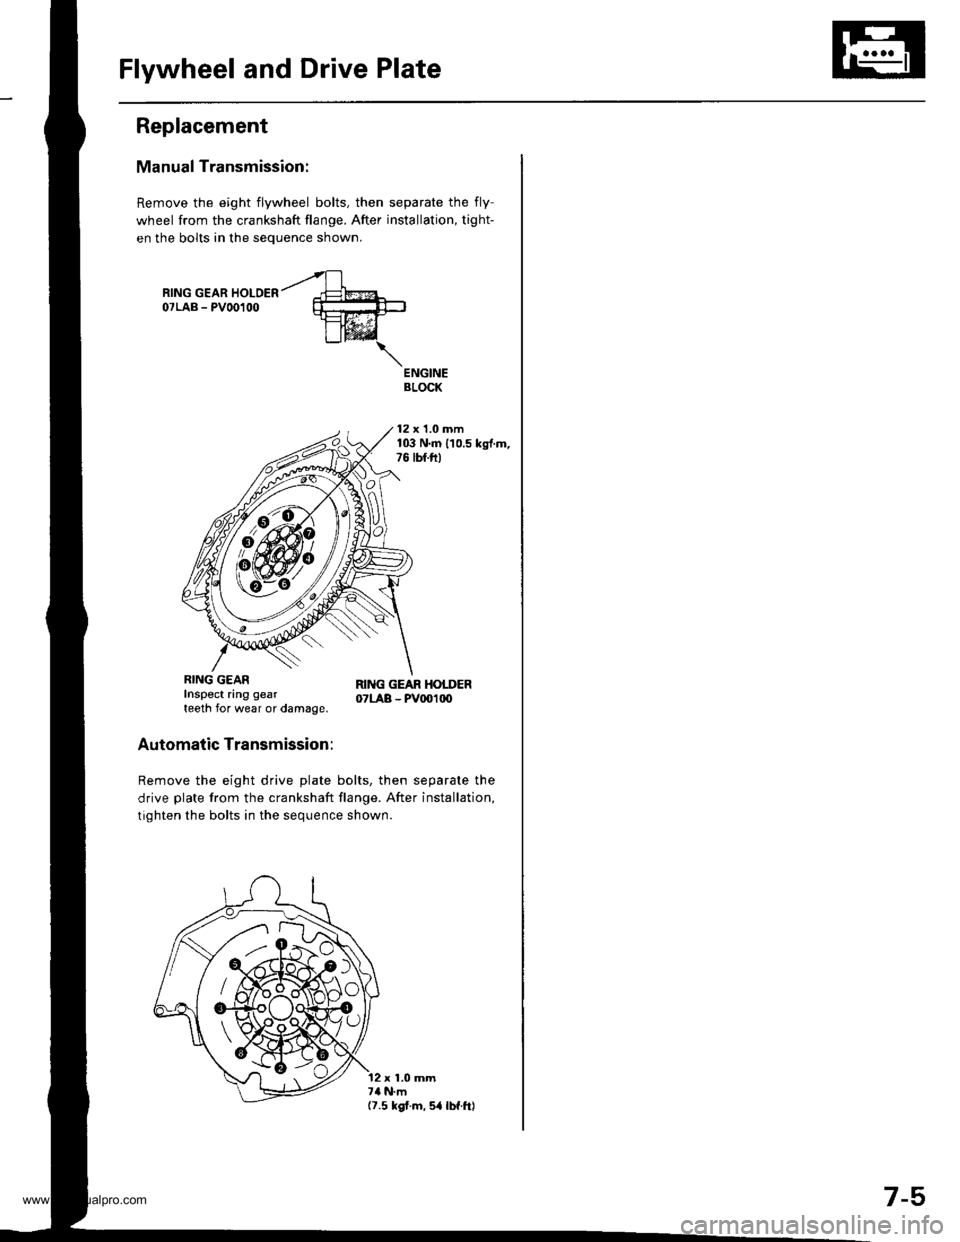 HONDA CR-V 1999 RD1-RD3 / 1.G Workshop Manual 
Flywheel and Drive Plate
Replacement
Manual Transmission:
Remove the eight flywheel bolts, then separate the fly-
wheel from the crankshaft flange. After installation, tight-
en the bolts in the sequ